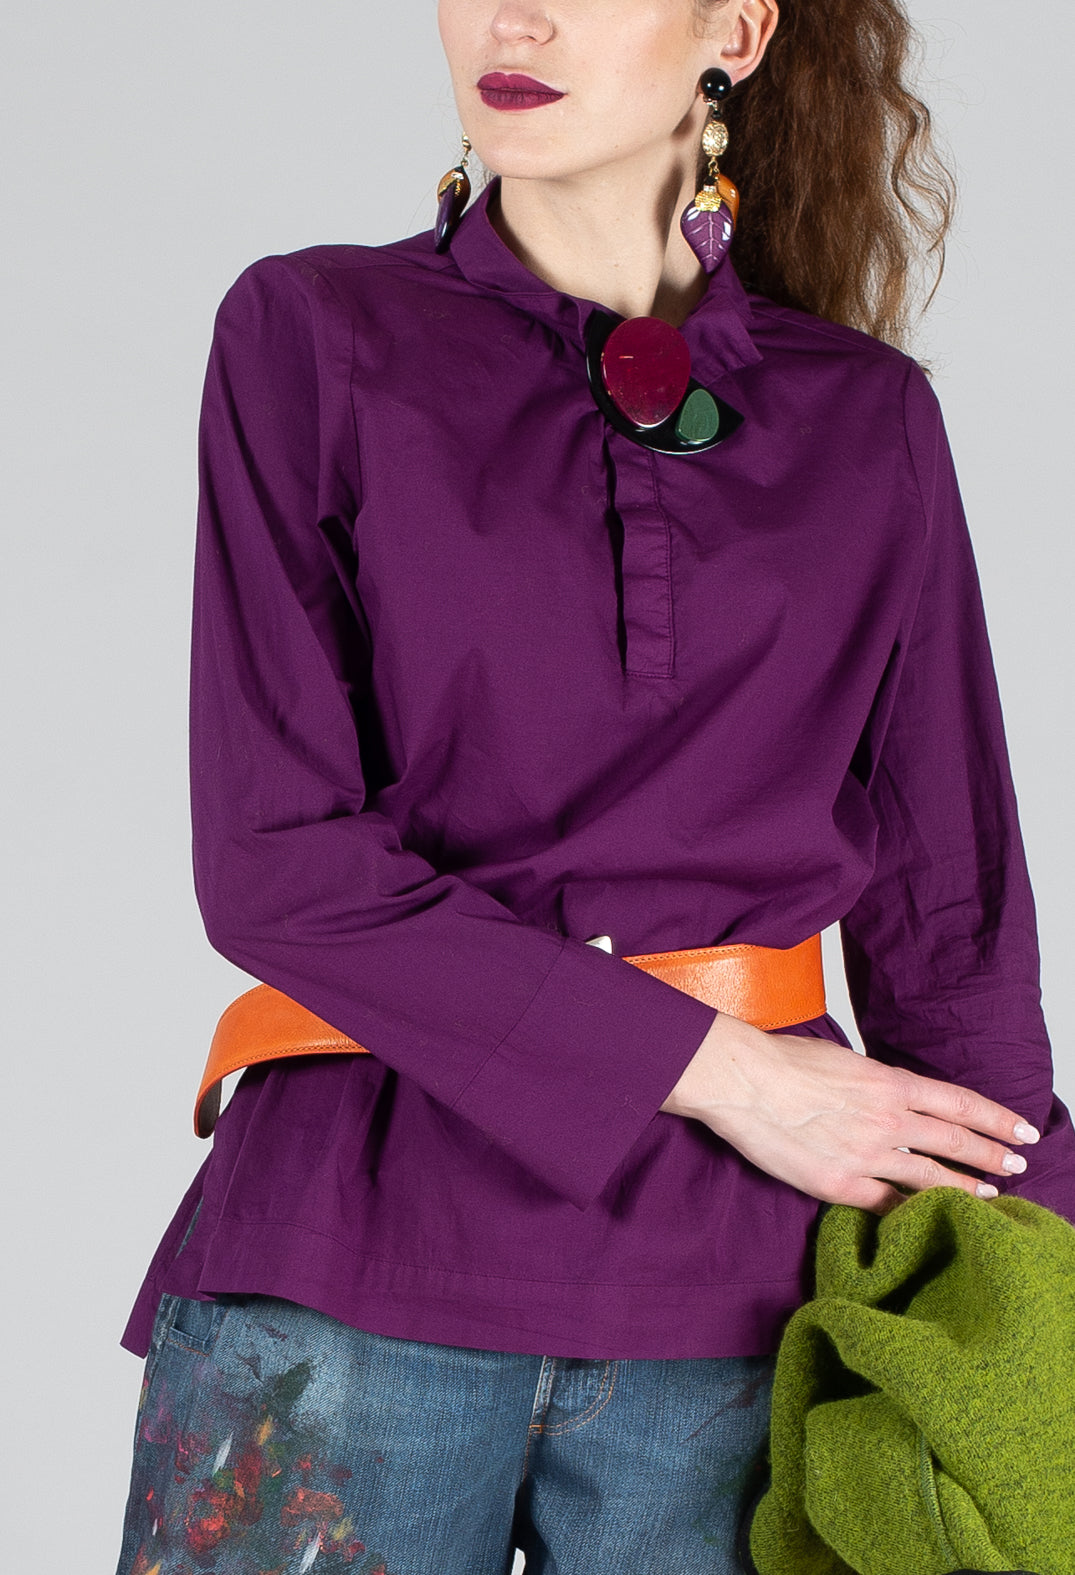 Tica Blouse in Violet